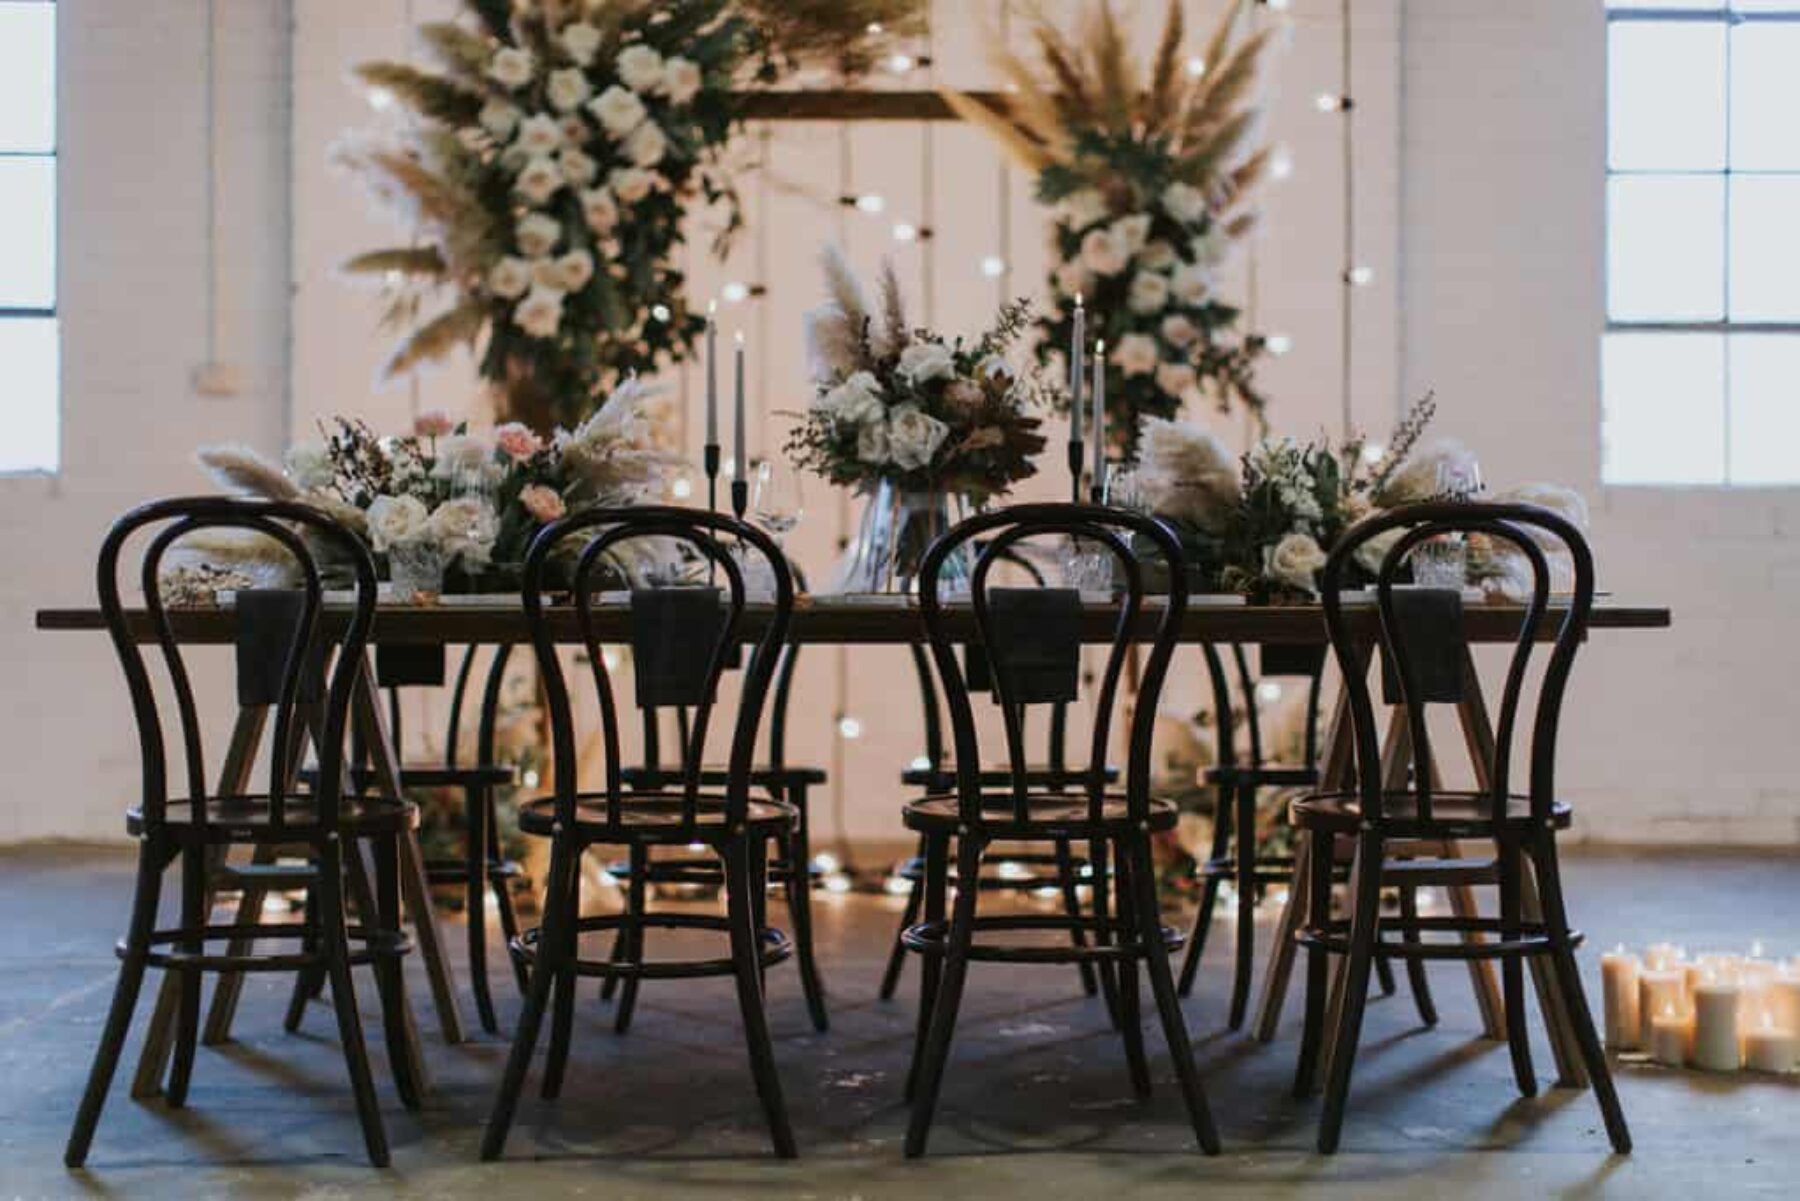 industrial-luxe wedding inspiration at Stackwood in Fremantle